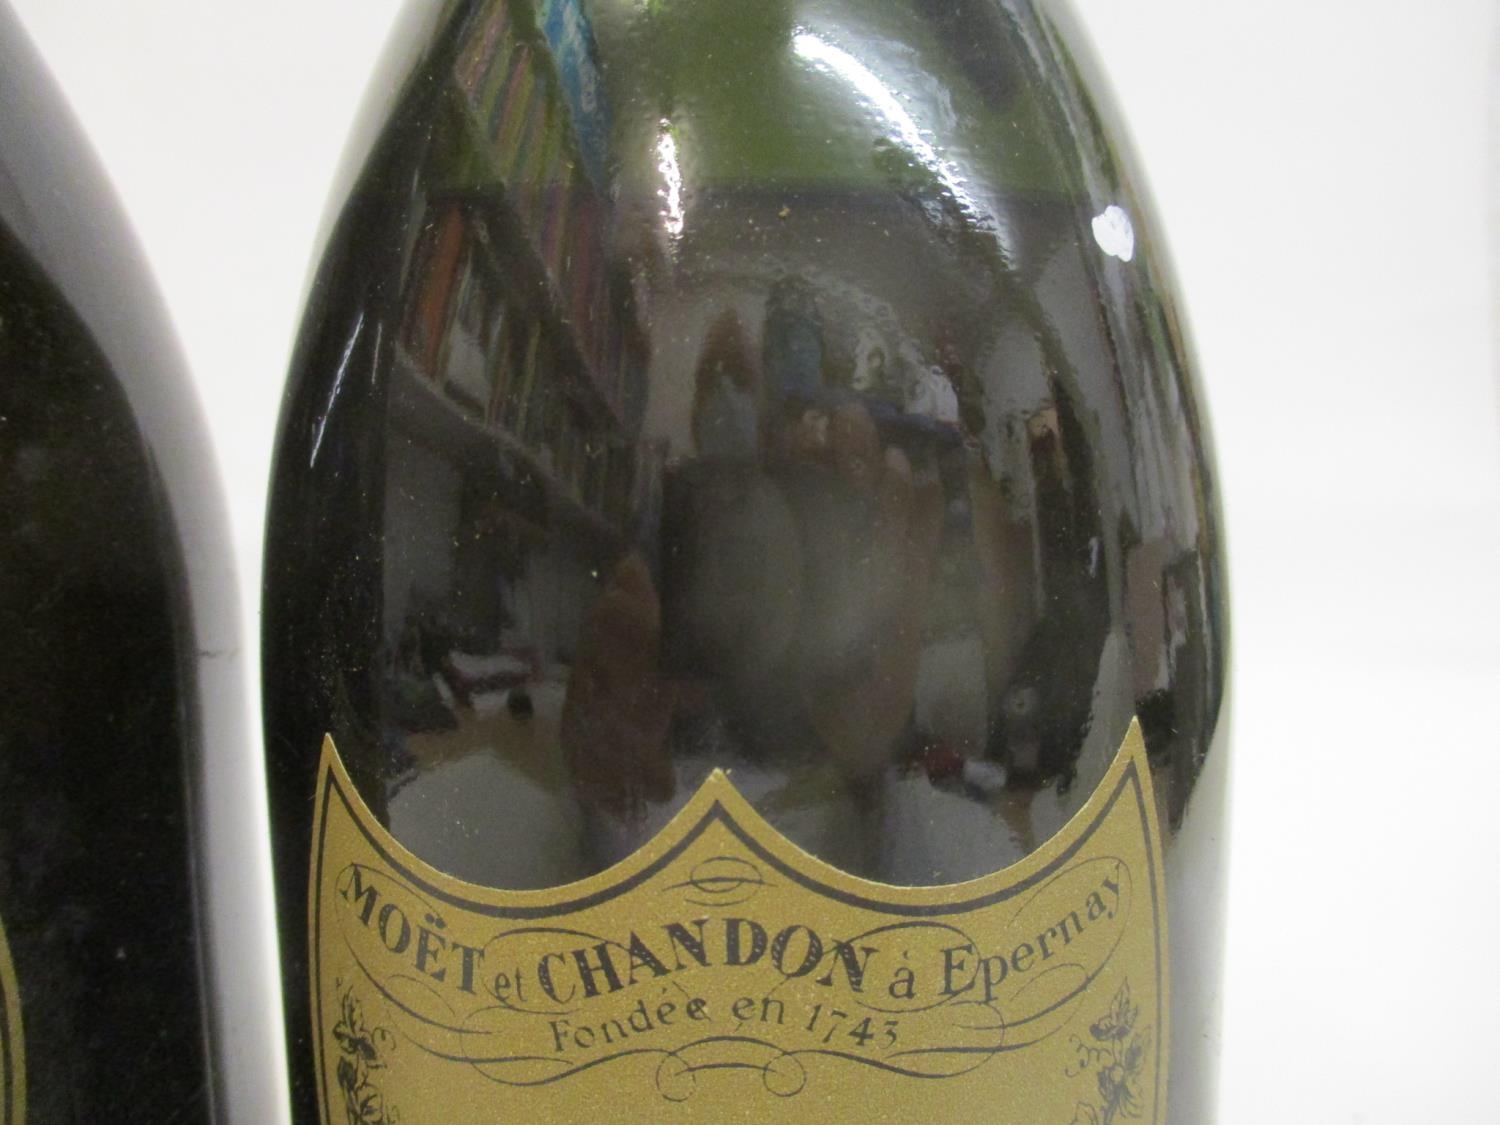 Three bottles of Moet & Chandon Dom Perignon vintage 1952 A/F Levels marked in white, one bottle - Image 3 of 3